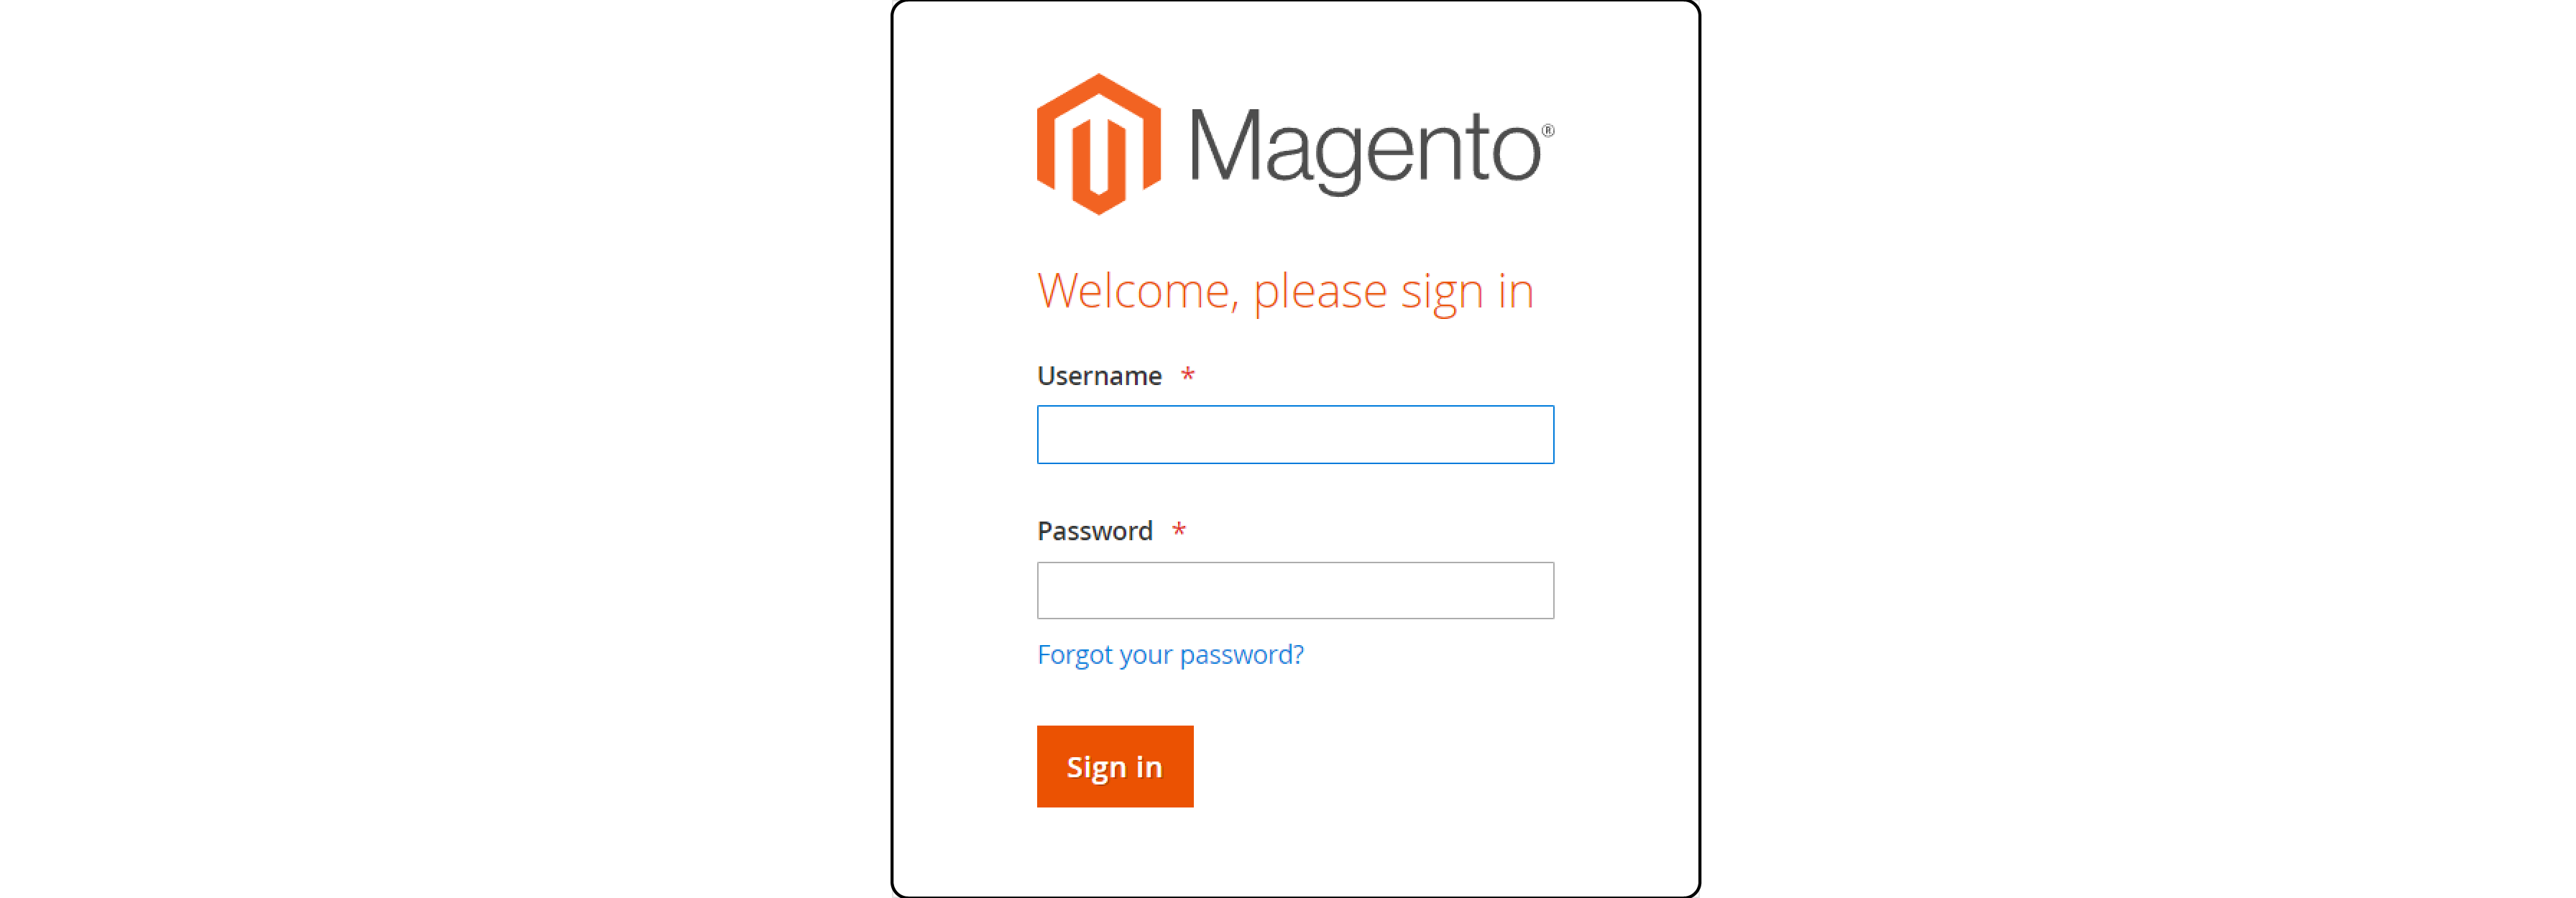 Step-by-step guide to logging into Magento 2 Admin Panel for RSS feed setup